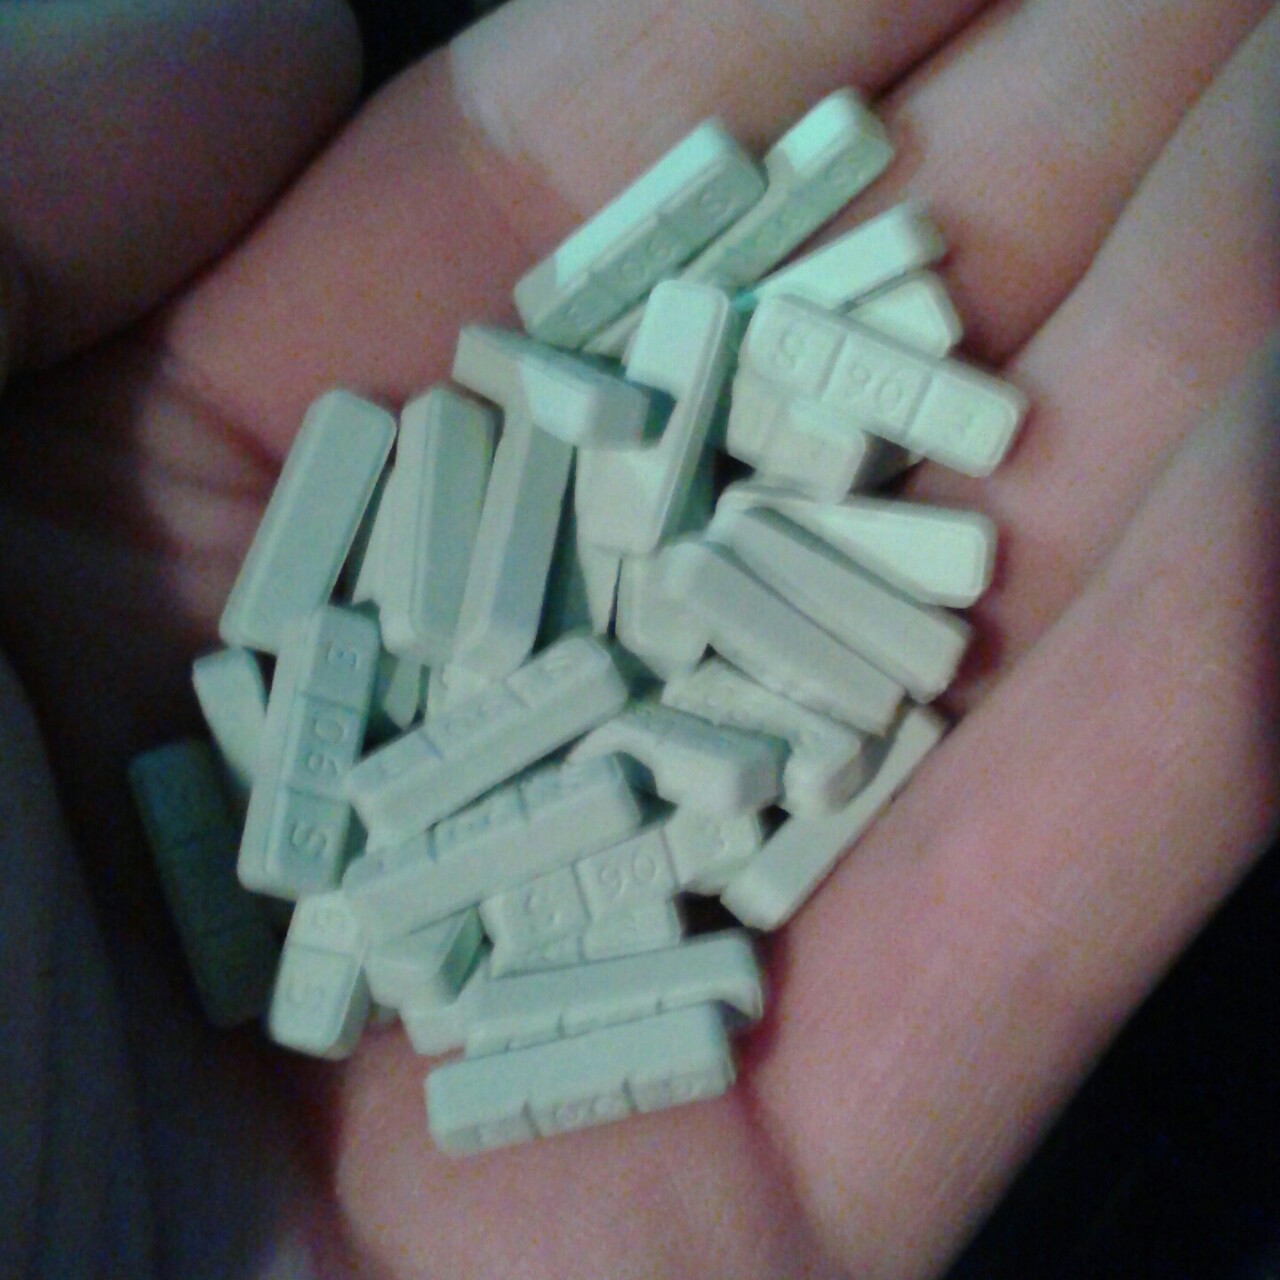 What used for are xanax bars